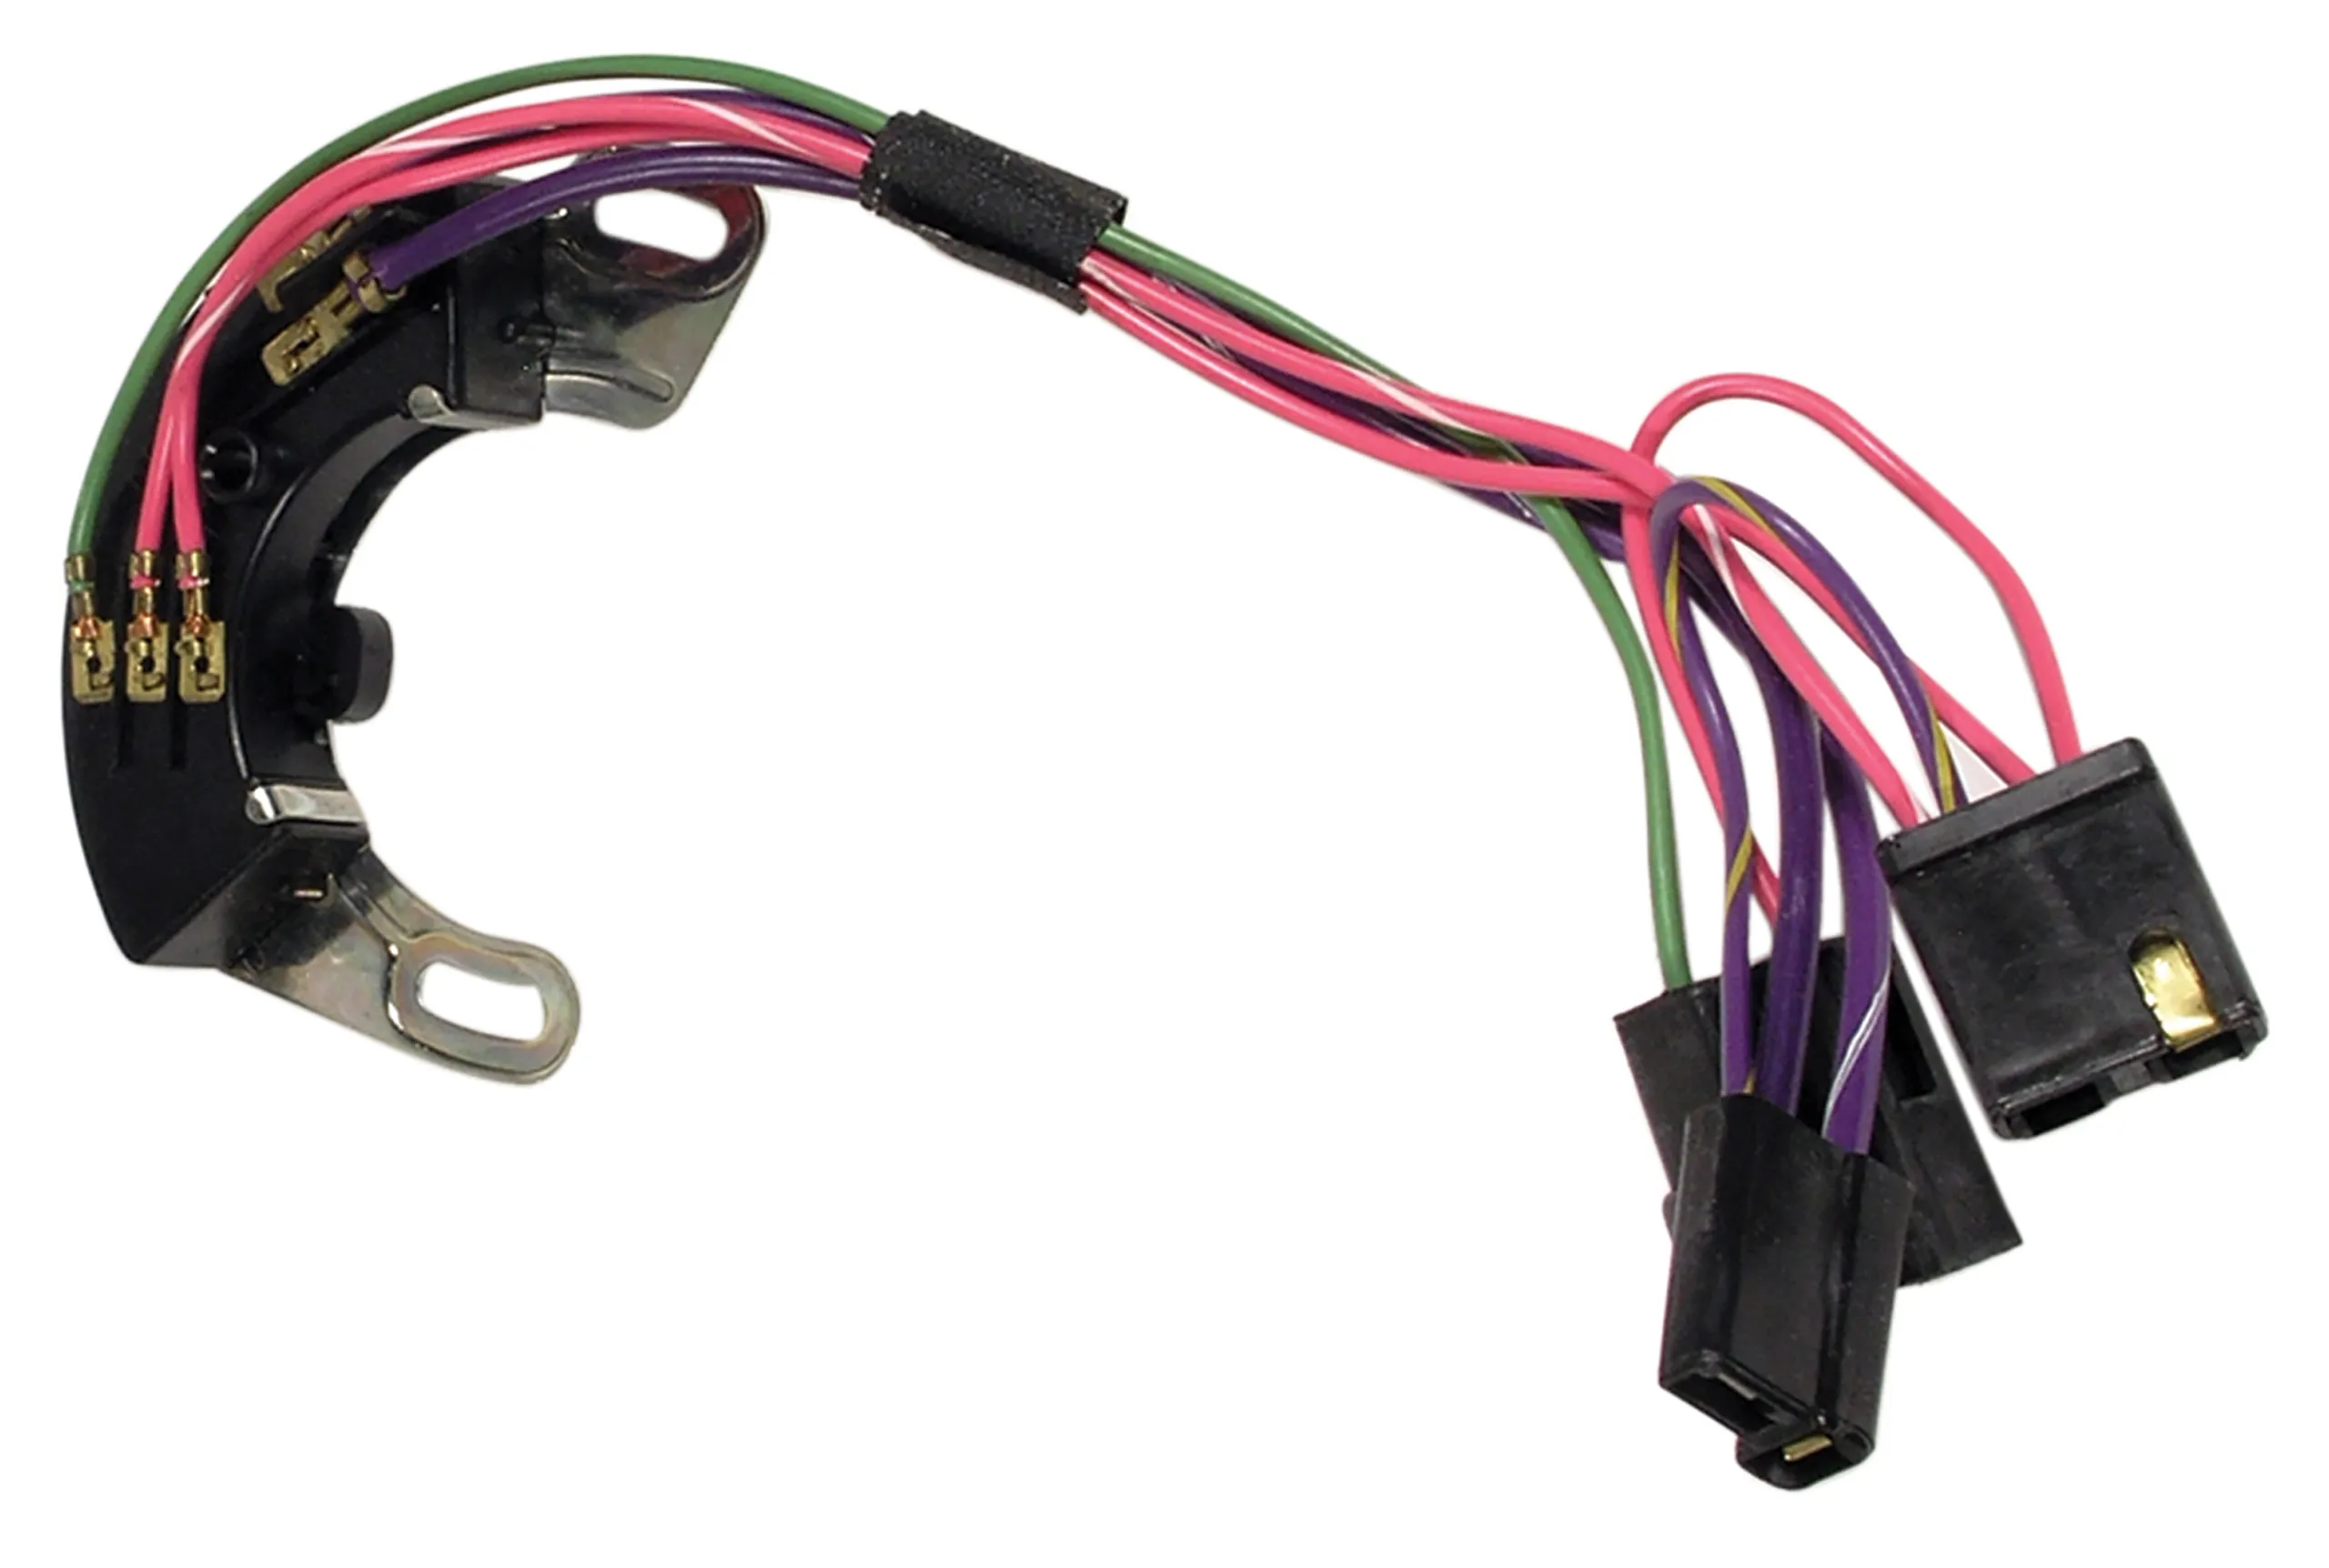 C3 1974-1975 Chevrolet Corvette Neutral Safety/Backup Switch. Automatic - Lectric Limited, Inc.